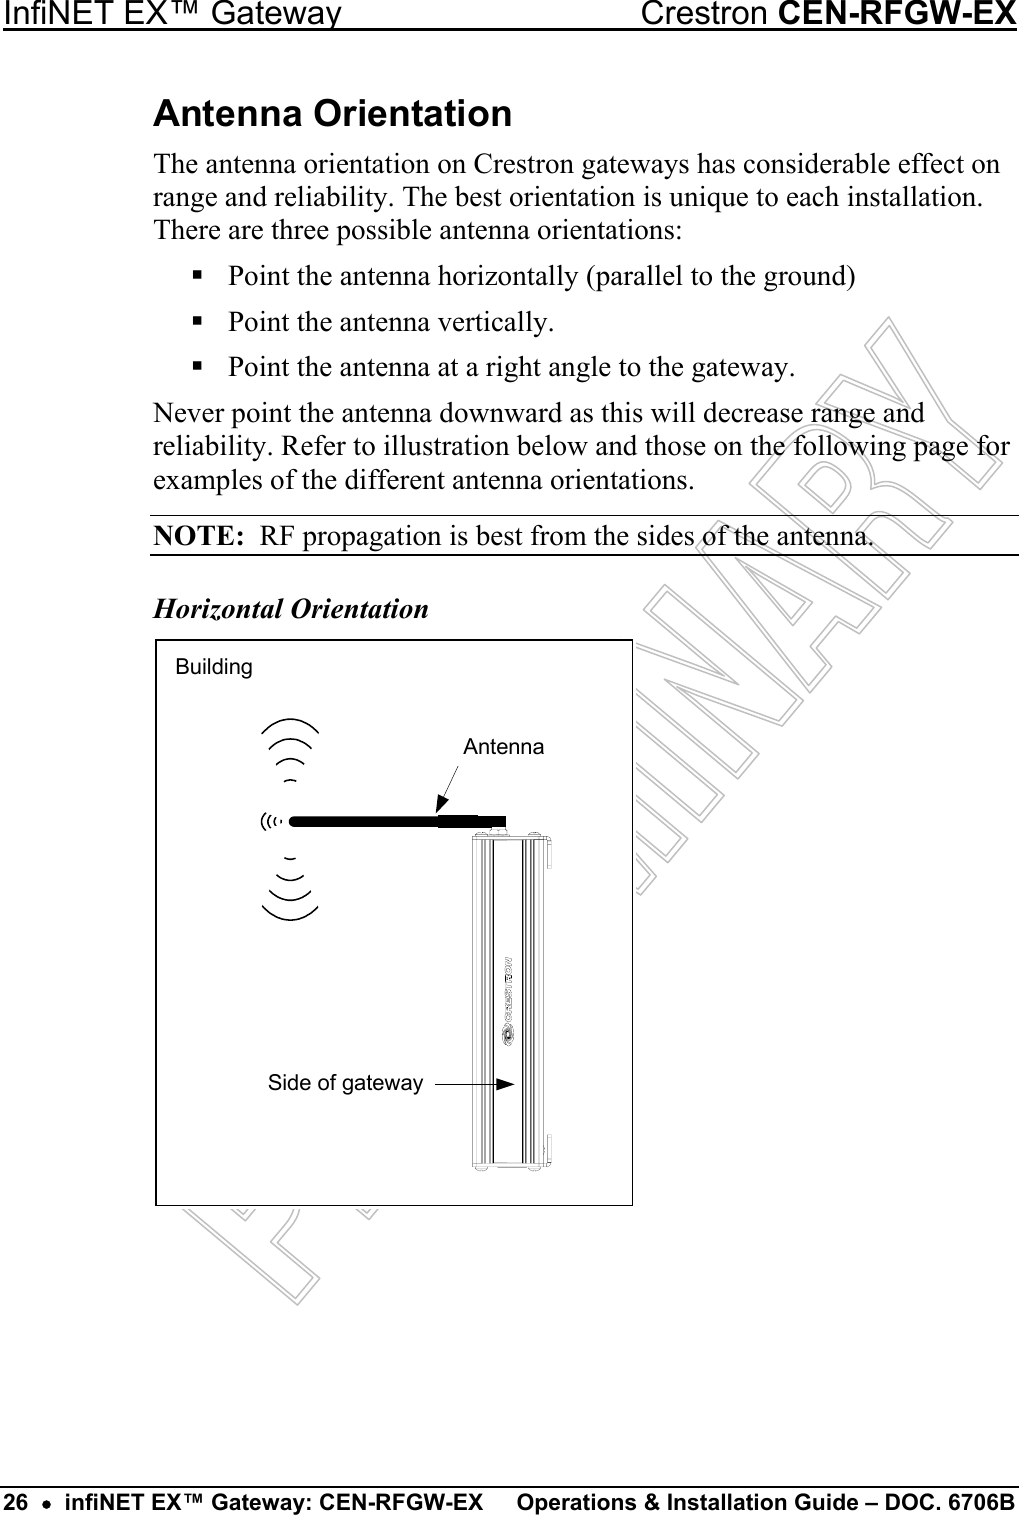 Side of gatewayBuildingAntenna InfiNET EX™ Gateway  Crestron CEN-RFGW-EX 26  •  infiNET EX™ Gateway: CEN-RFGW-EX  Operations &amp; Installation Guide – DOC. 6706B Antenna Orientation The antenna orientation on Crestron gateways has considerable effect on range and reliability. The best orientation is unique to each installation. There are three possible antenna orientations:  Point the antenna horizontally (parallel to the ground)  Point the antenna vertically.  Point the antenna at a right angle to the gateway. Never point the antenna downward as this will decrease range and reliability. Refer to illustration below and those on the following page for examples of the different antenna orientations. NOTE:  RF propagation is best from the sides of the antenna. Horizontal Orientation 